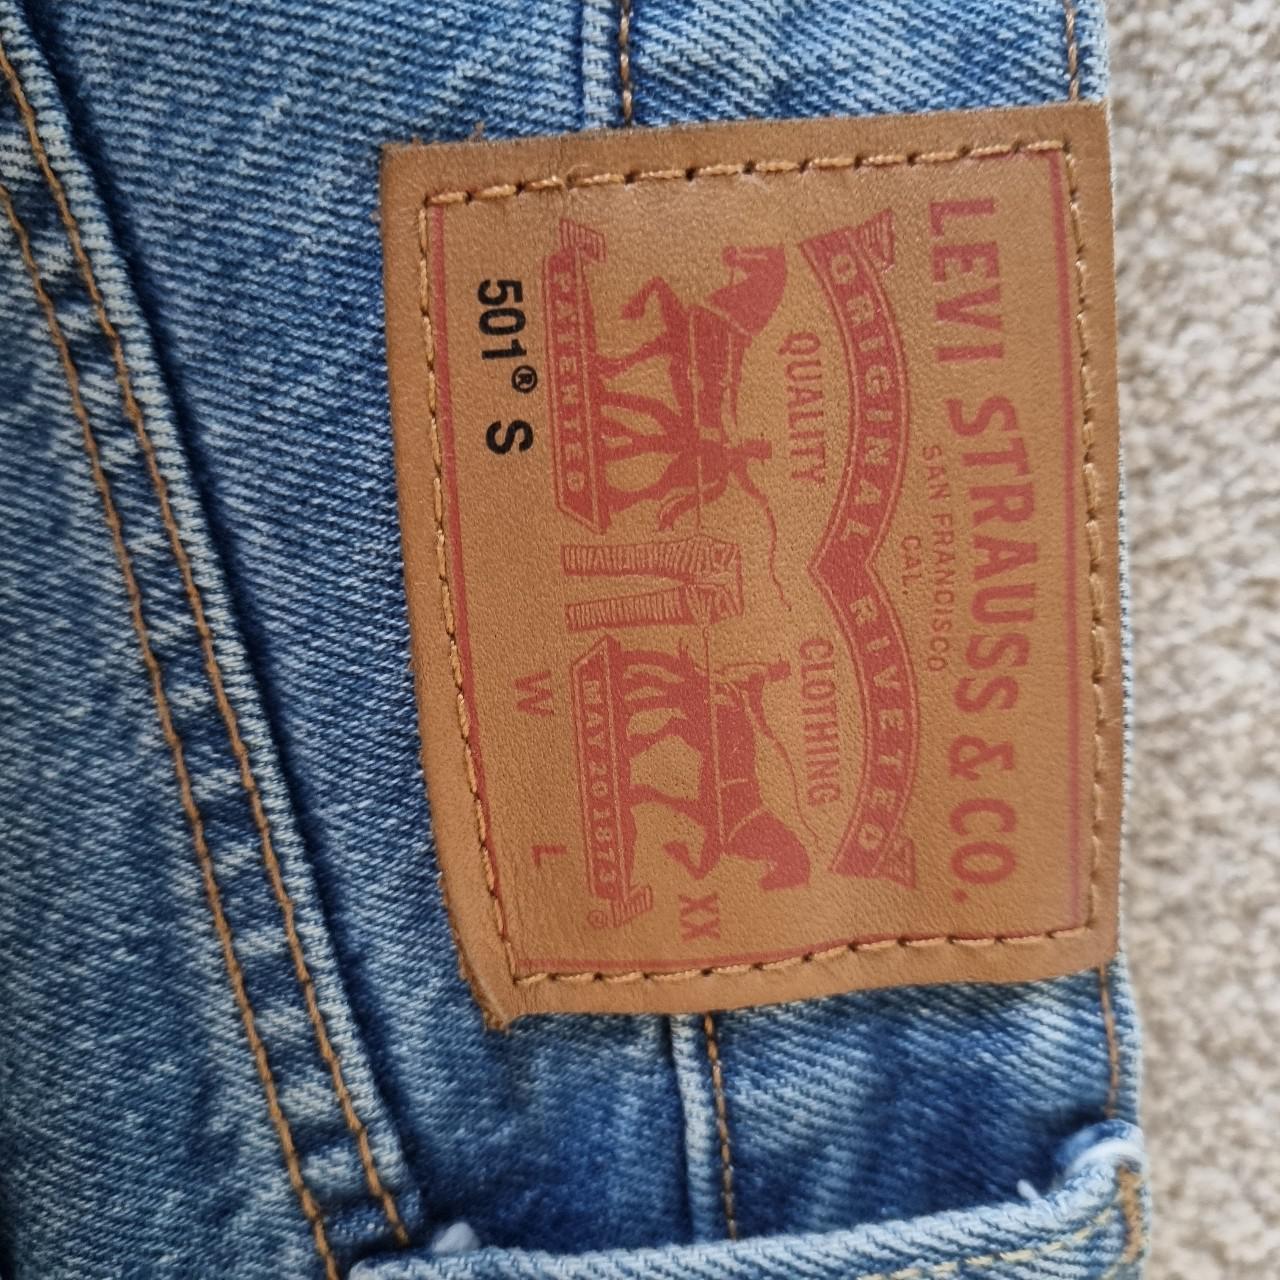 Classic Levi 501 ripped knee jeans. Hardly worn and... - Depop